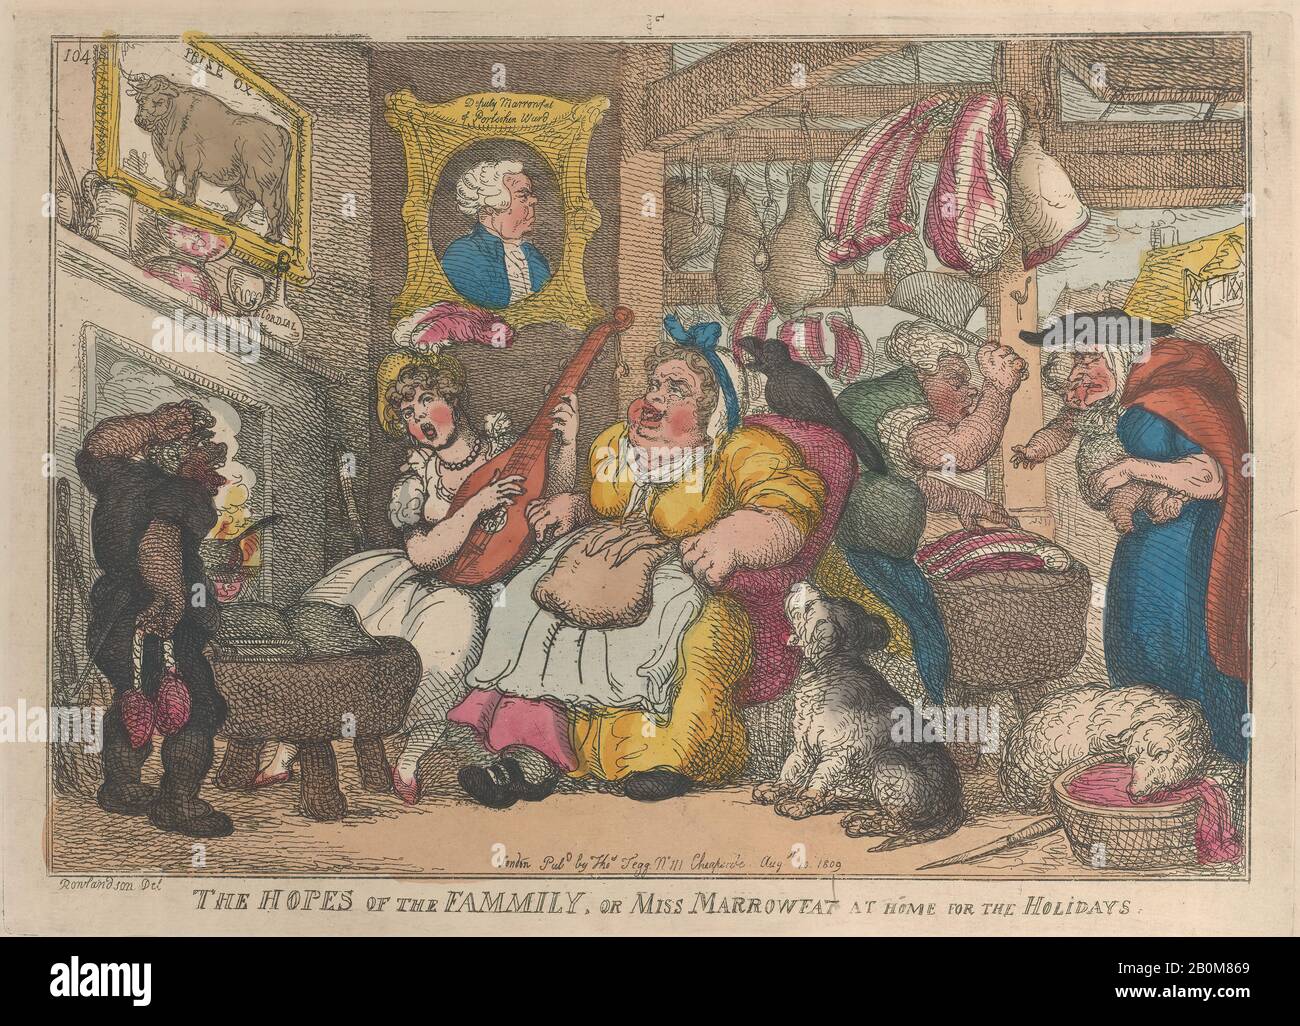 Thomas Rowlandson, The Hopes of the Family, or Miss Marrowfat at Home for the Holidays, Thomas Rowlandson (British, London 1757–1827 London), August 10, 1809, Hand-colored etching, Plate: 9 13/16 × 13 11/16 in. (24.9 × 34.7 cm), Sheet: 10 3/8 × 14 1/16 in. (26.4 × 35.7 cm), Prints Stock Photo